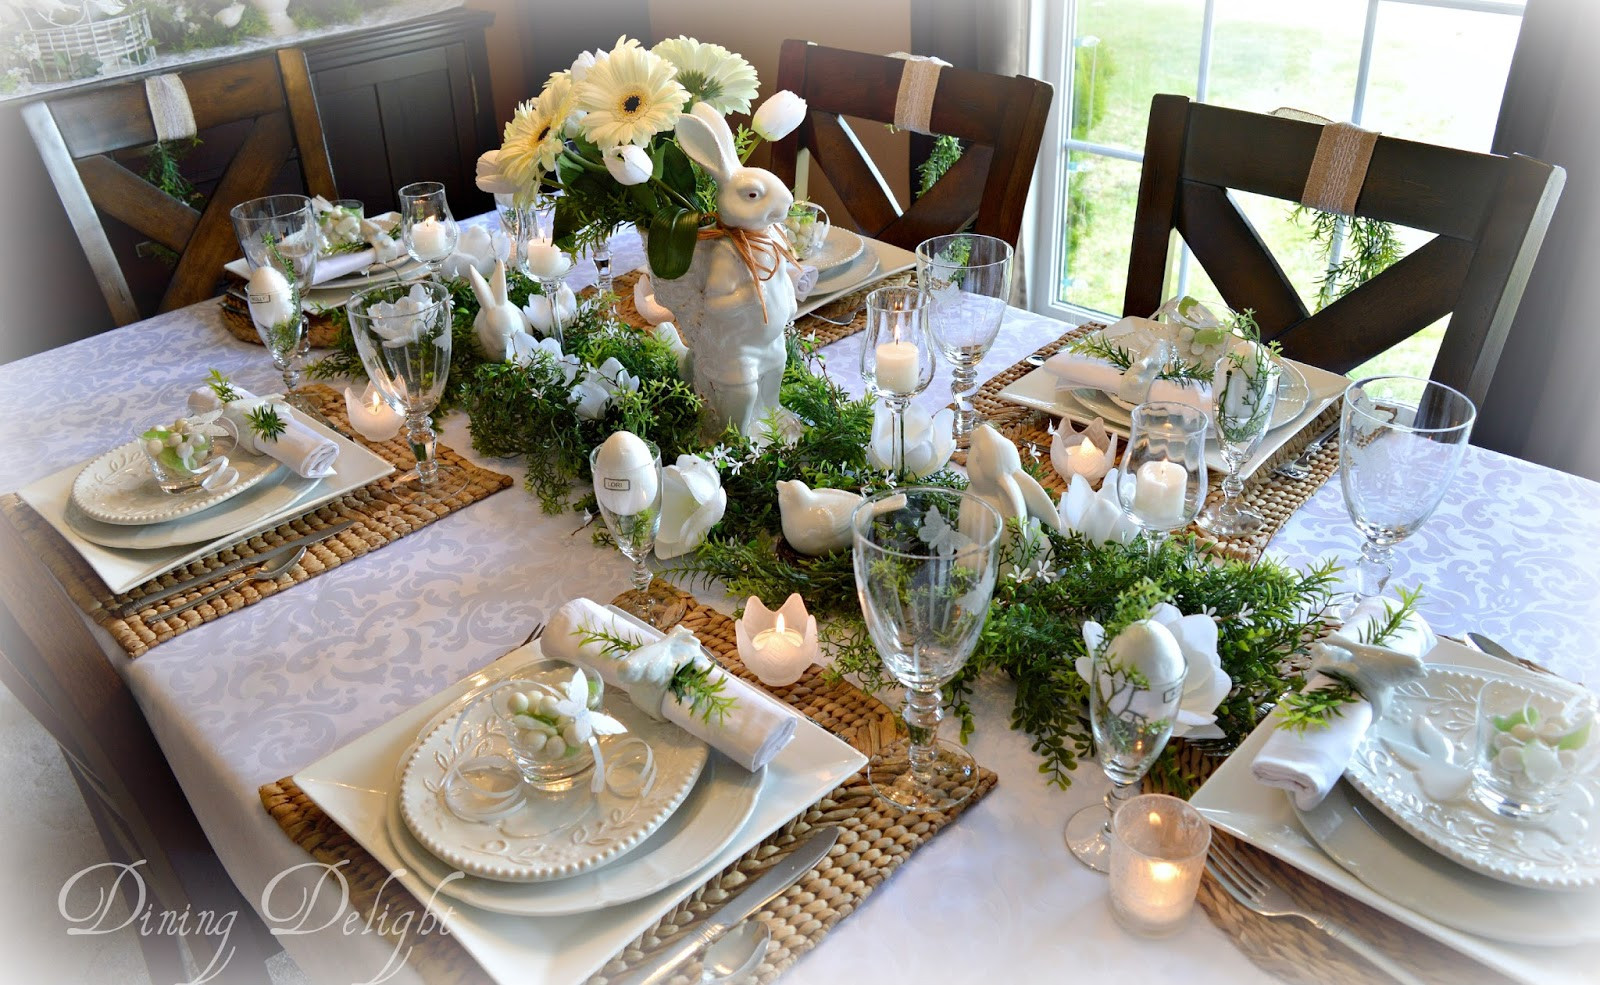 Easter Dinner Table
 Dining Delight A White Easter Tablescape